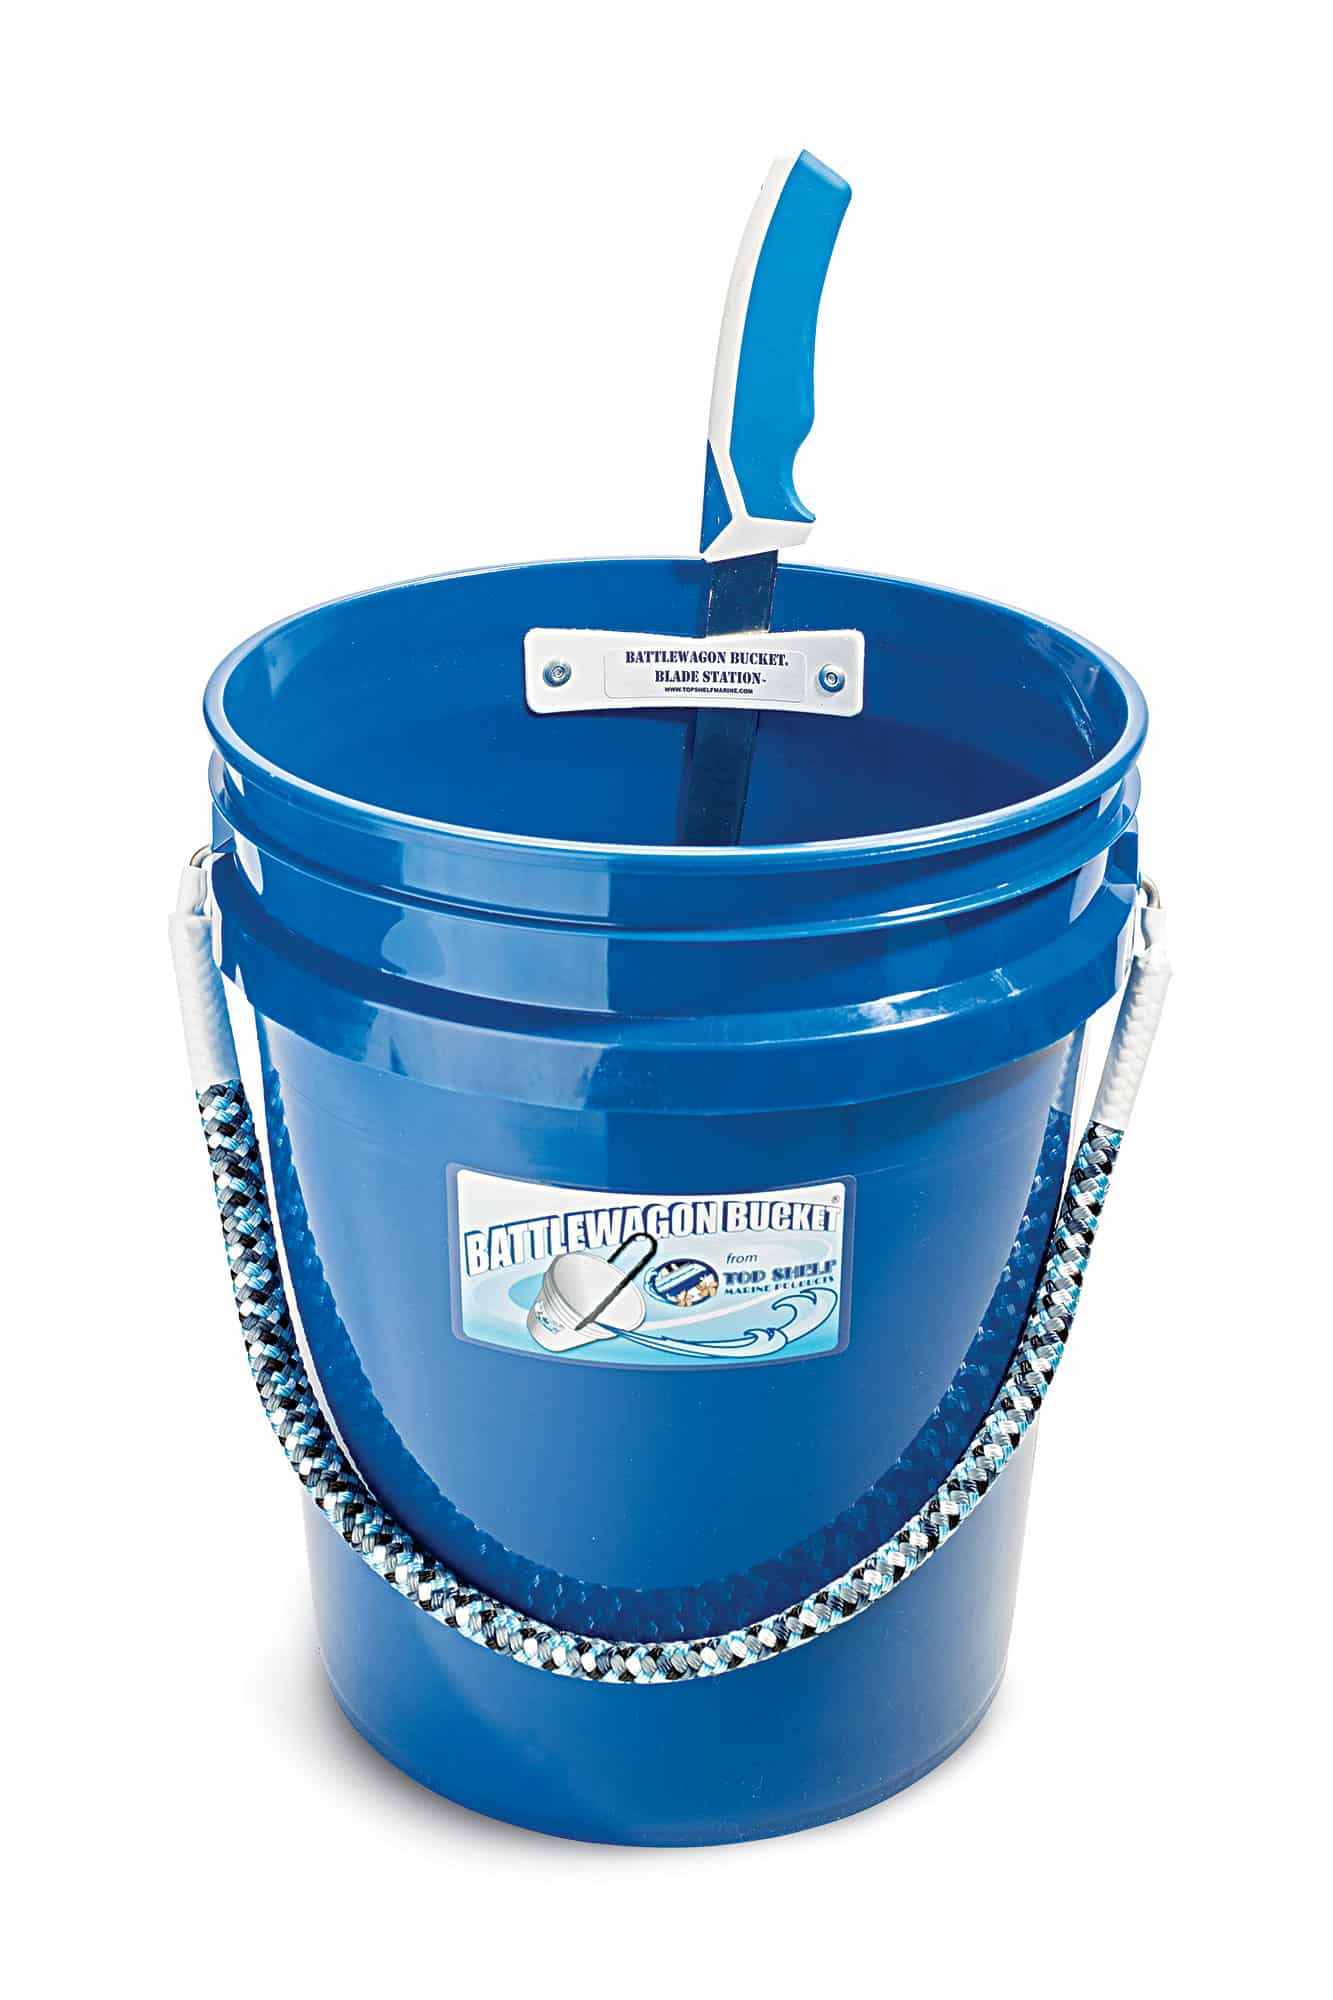 Battlewagon 5 Gallon Rope Handled Boat Bucket - Sportfish Outfitters